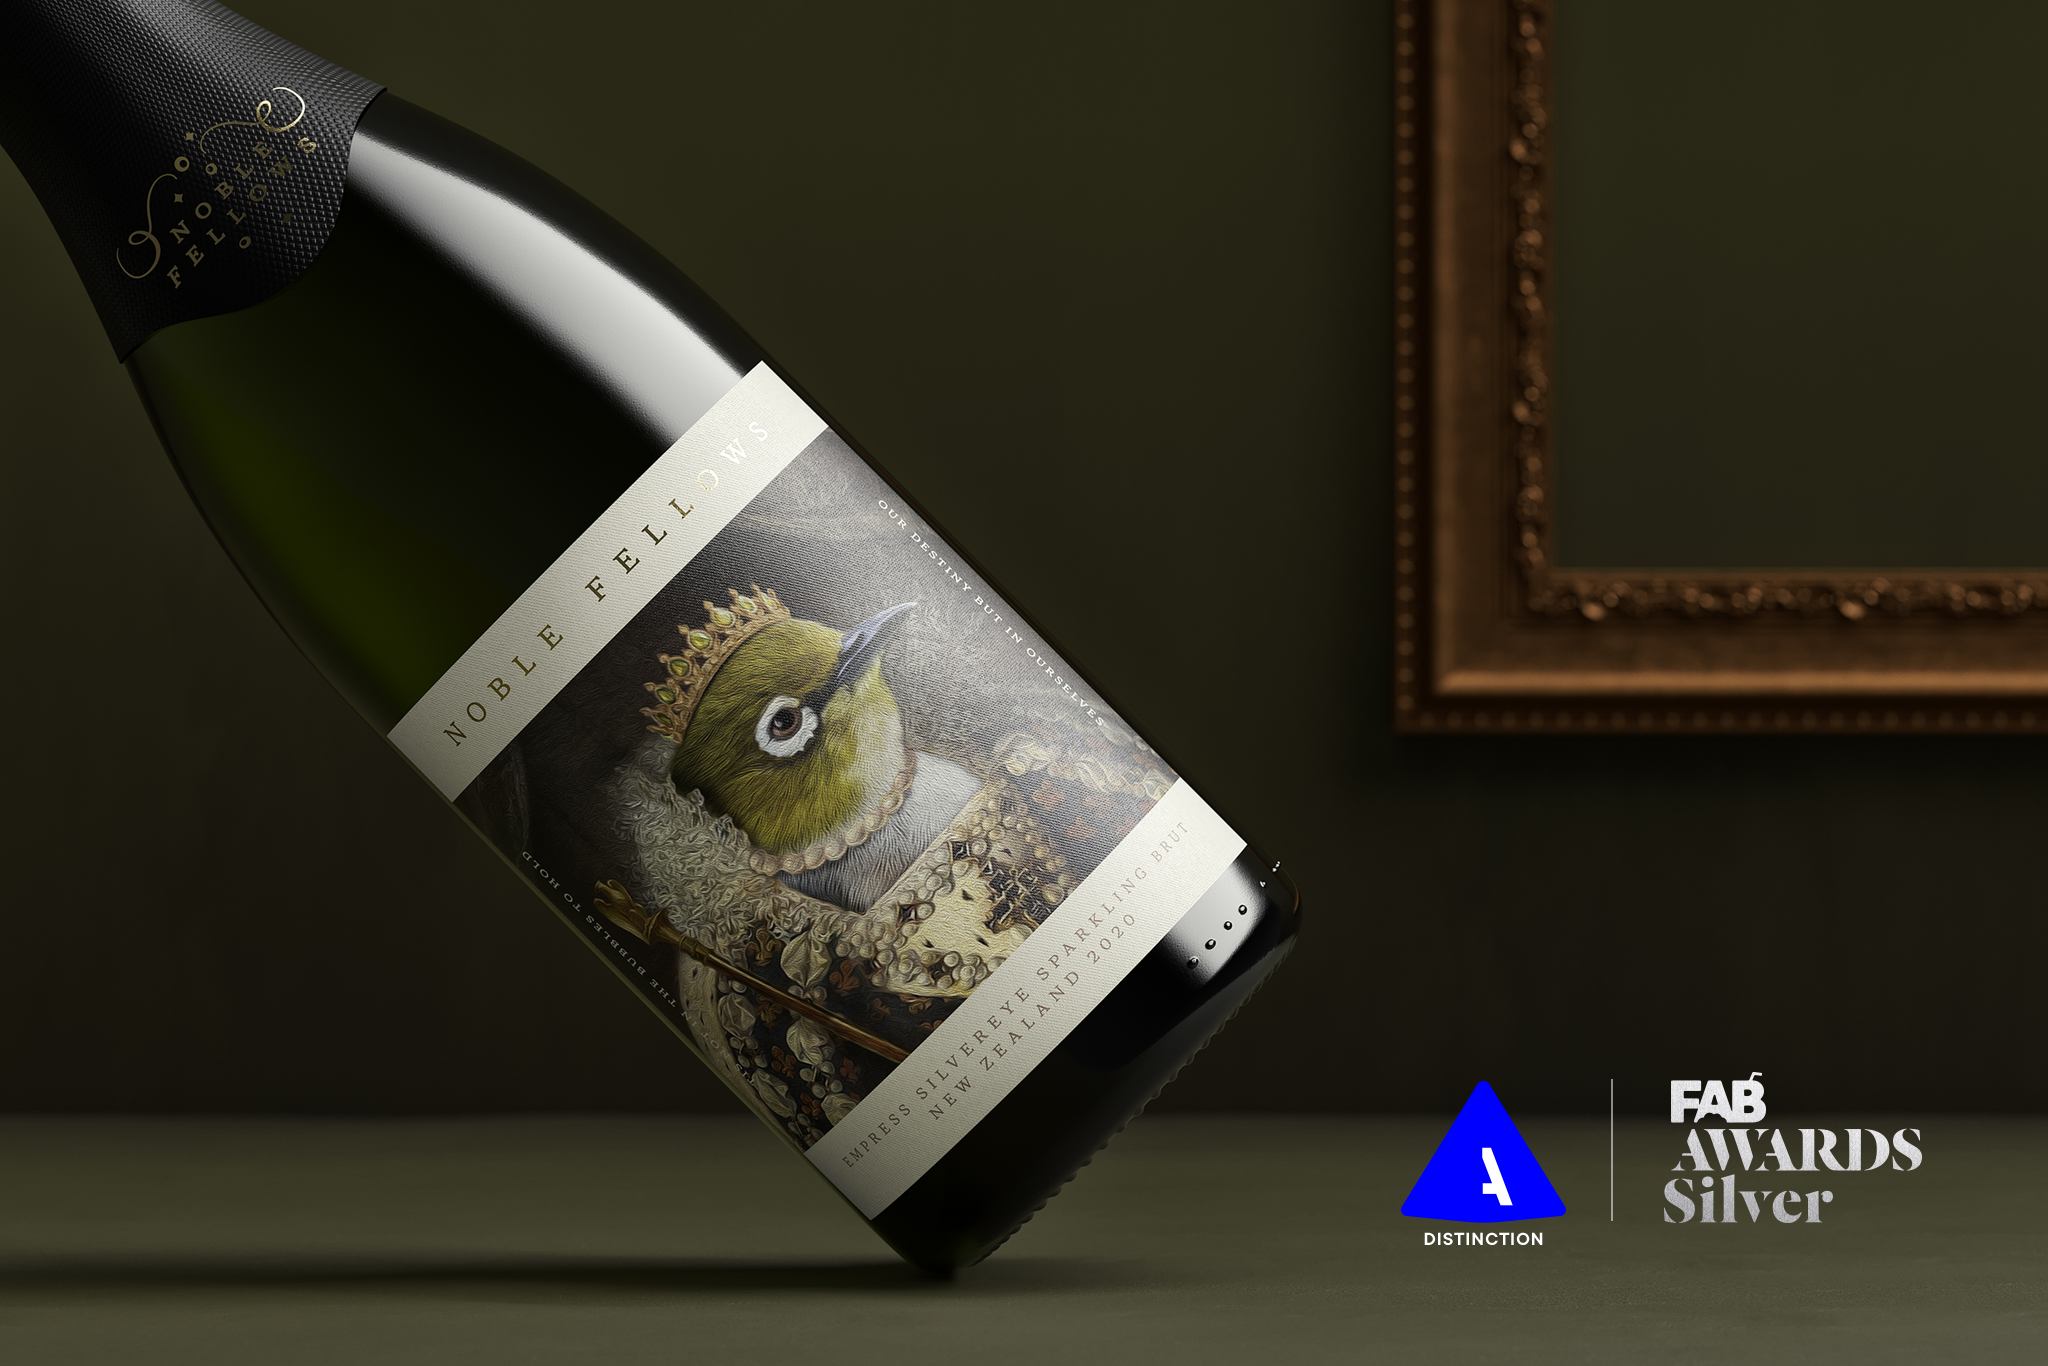 Noble Fellows wine brand designed by Our Revolution packaging design agency in Sydney featuring wine label design winning an AGDA award for distinction Jen Doran